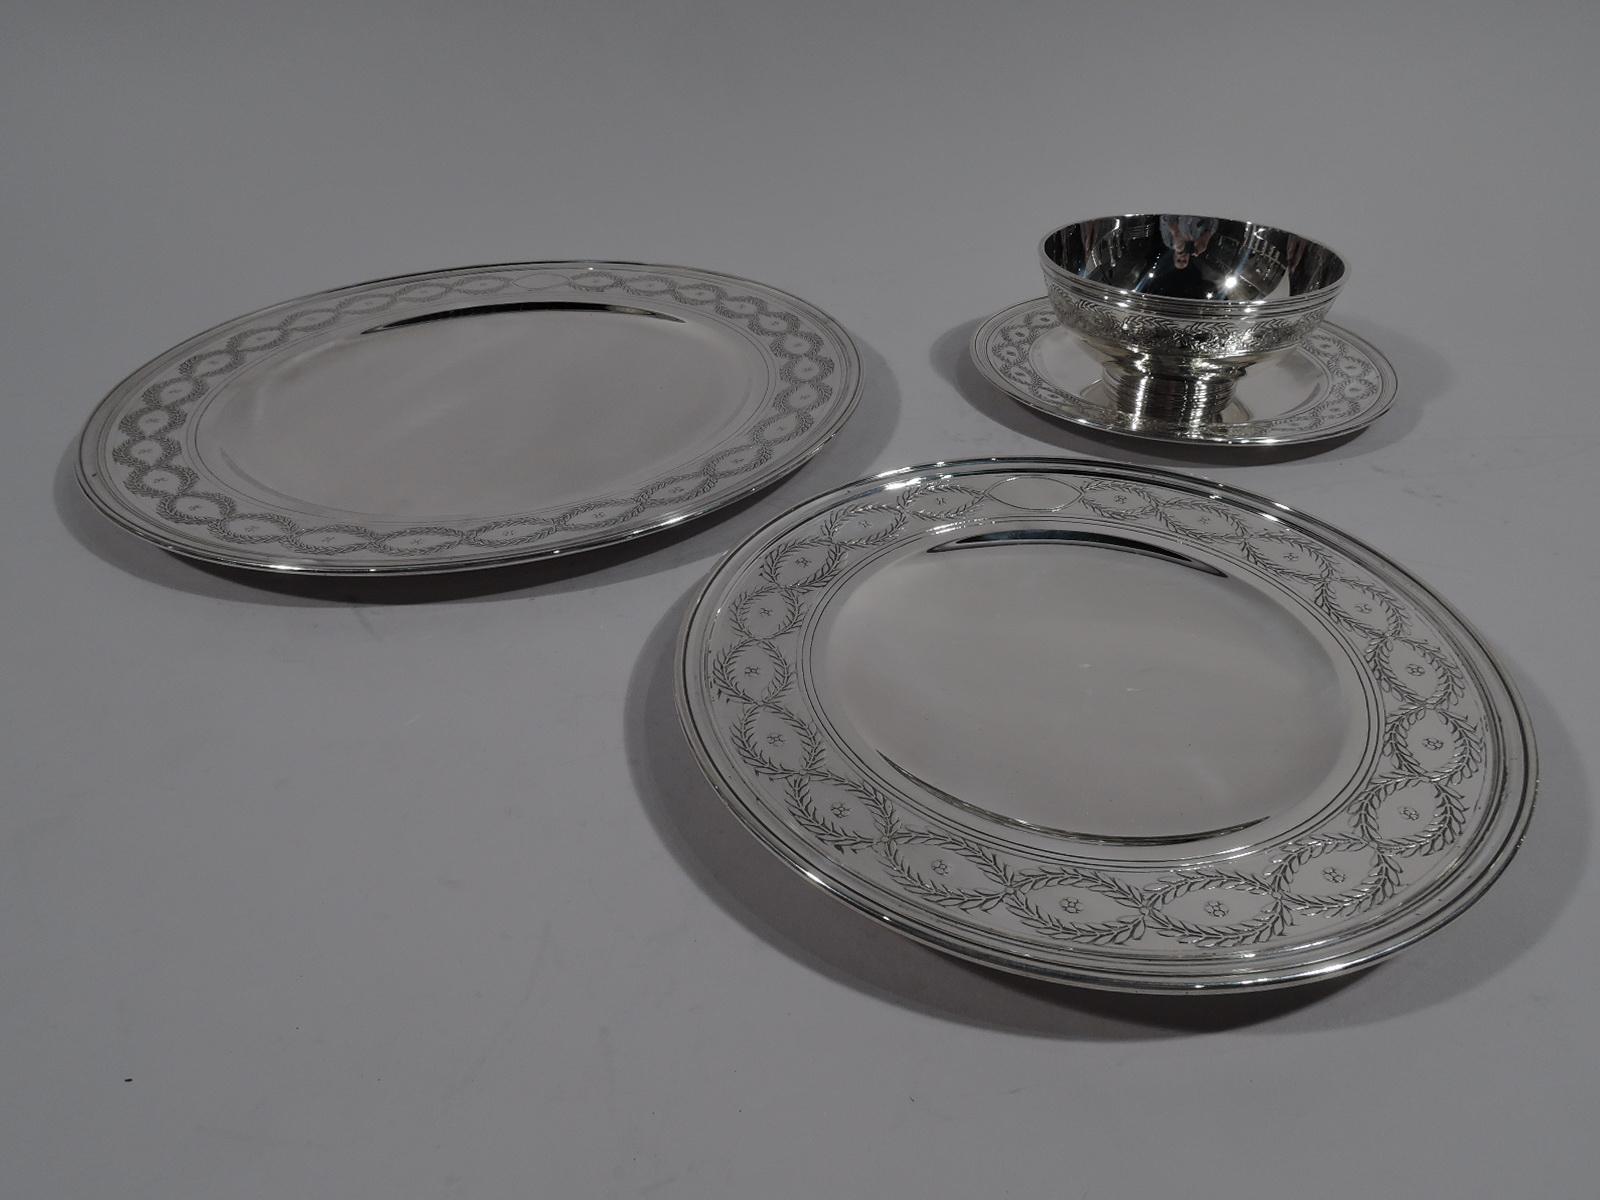 Regency Revival Set of Tiffany Winthrop Sterling Silver Dinner Plates and Bowls